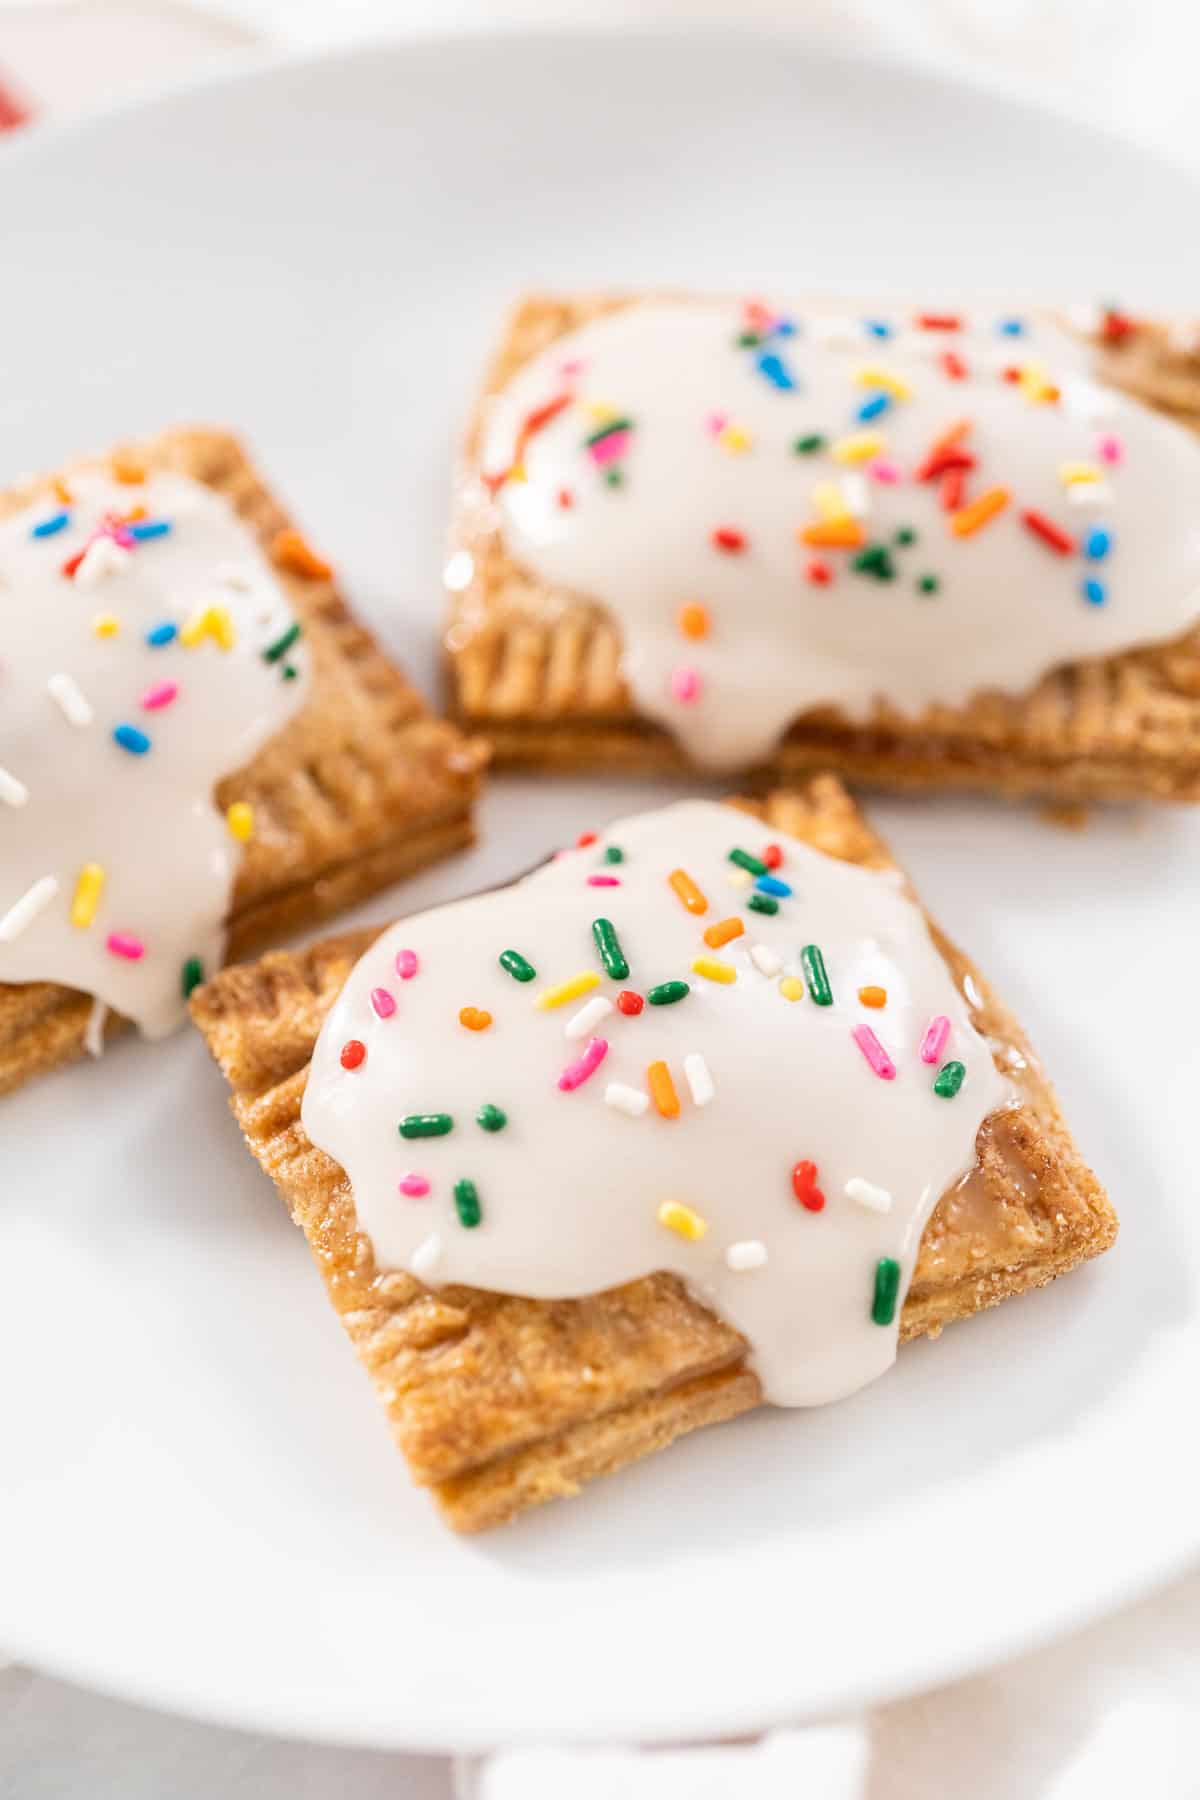 3 vegan pop tarts with icing and sprinkles on a white plate.